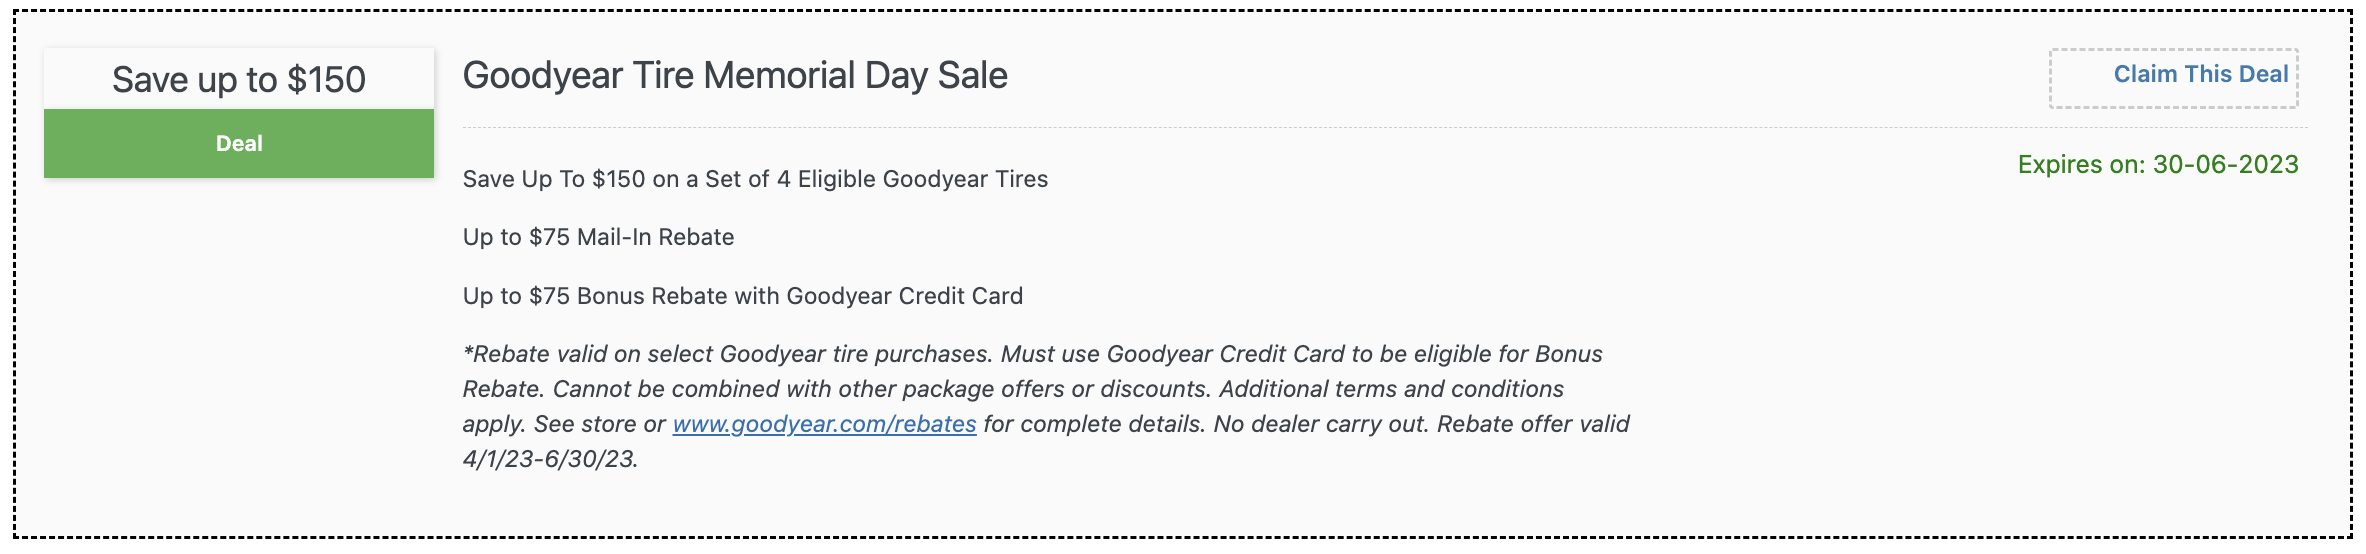 goodyear tire memorial day sale